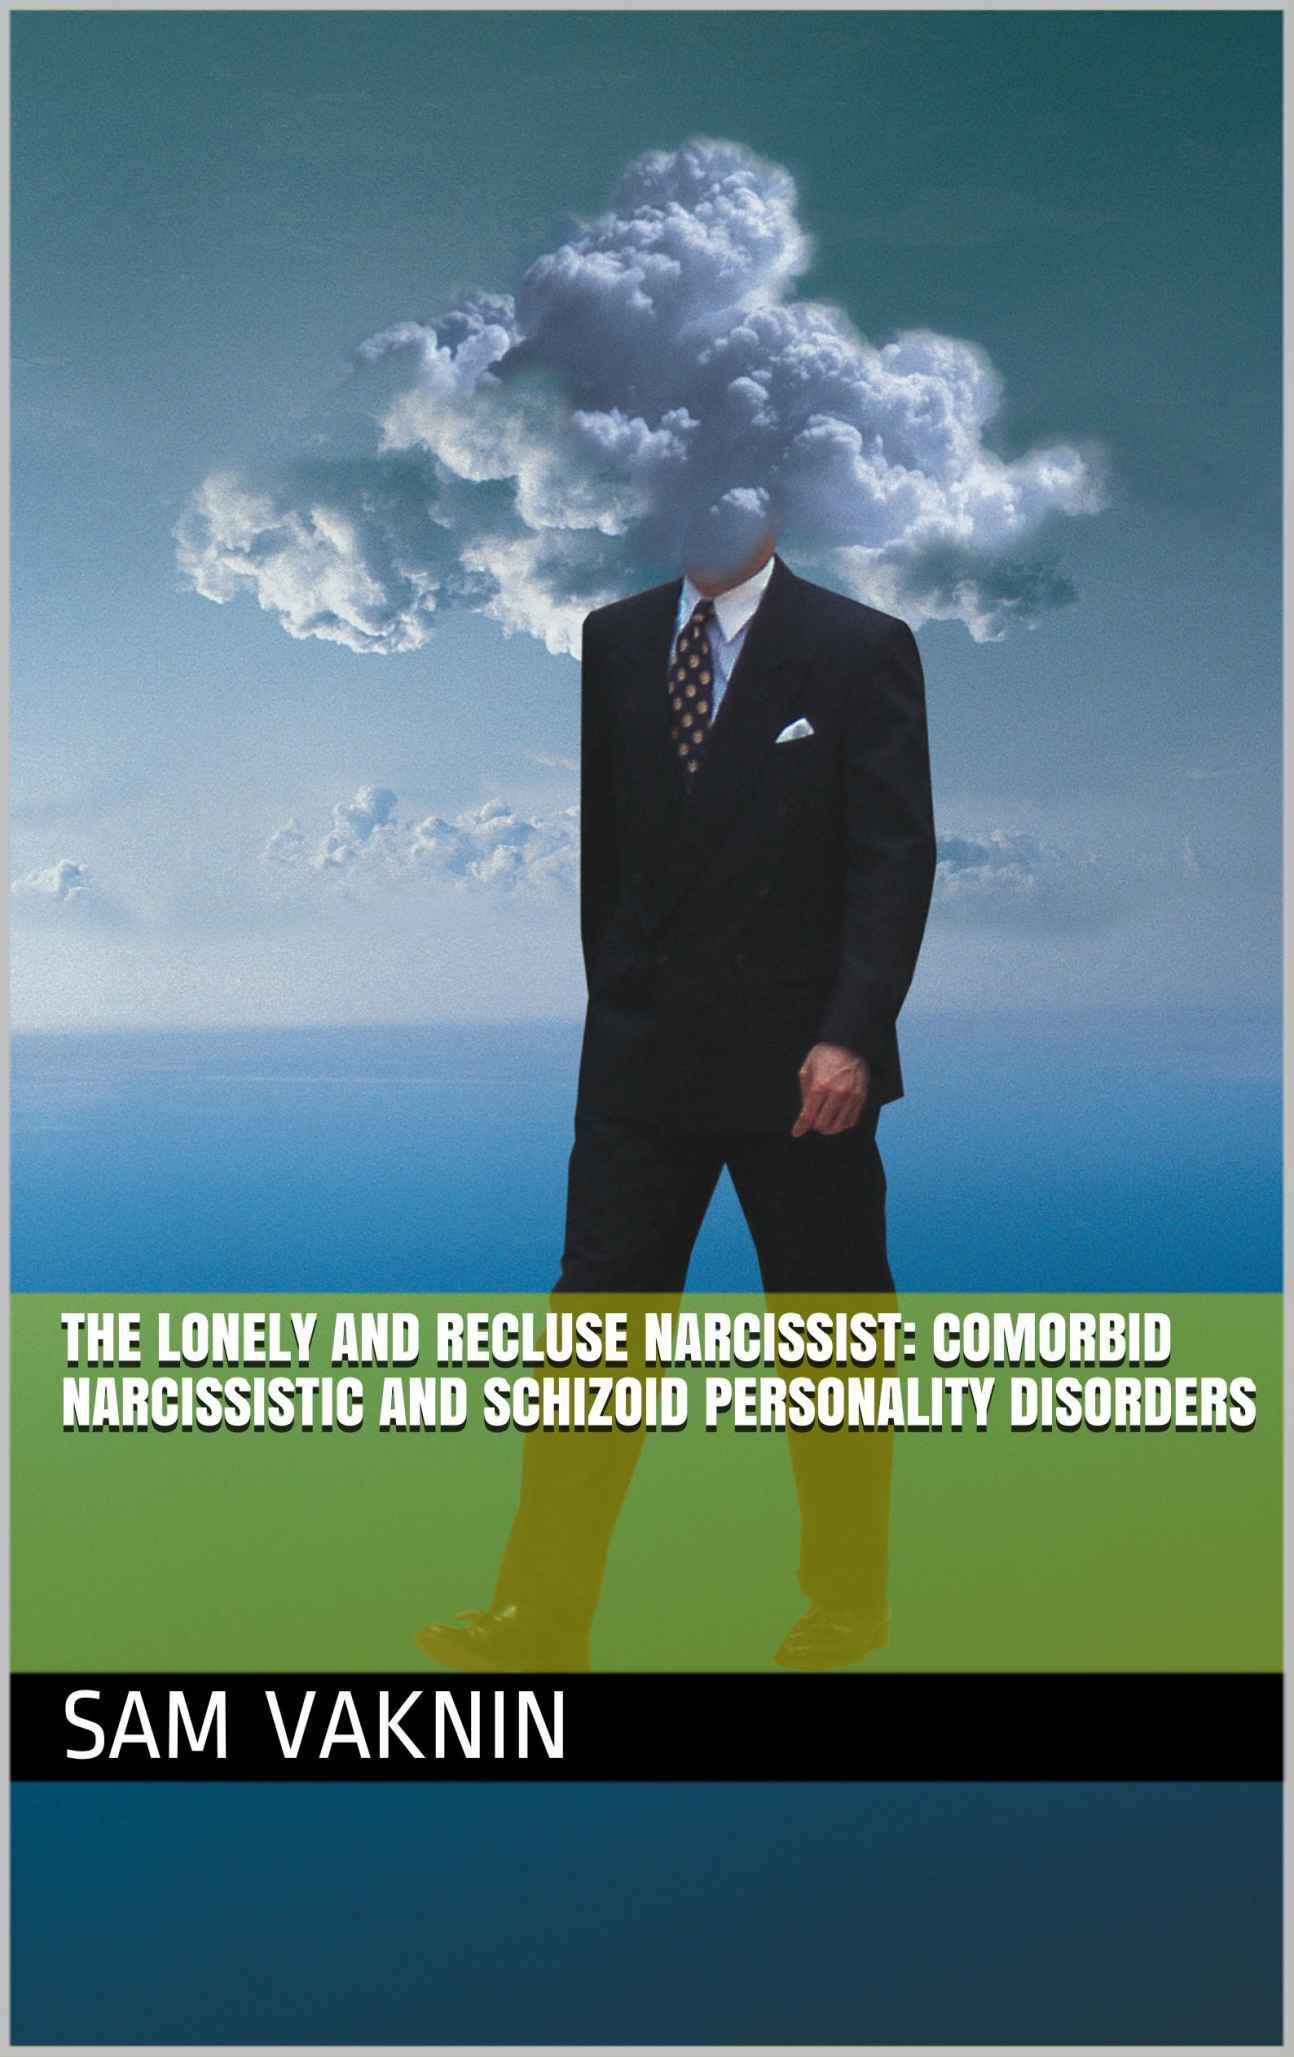 The Lonely and Recluse Narcissist: Comorbid Narcissistic and Schizoid Personality Disorders